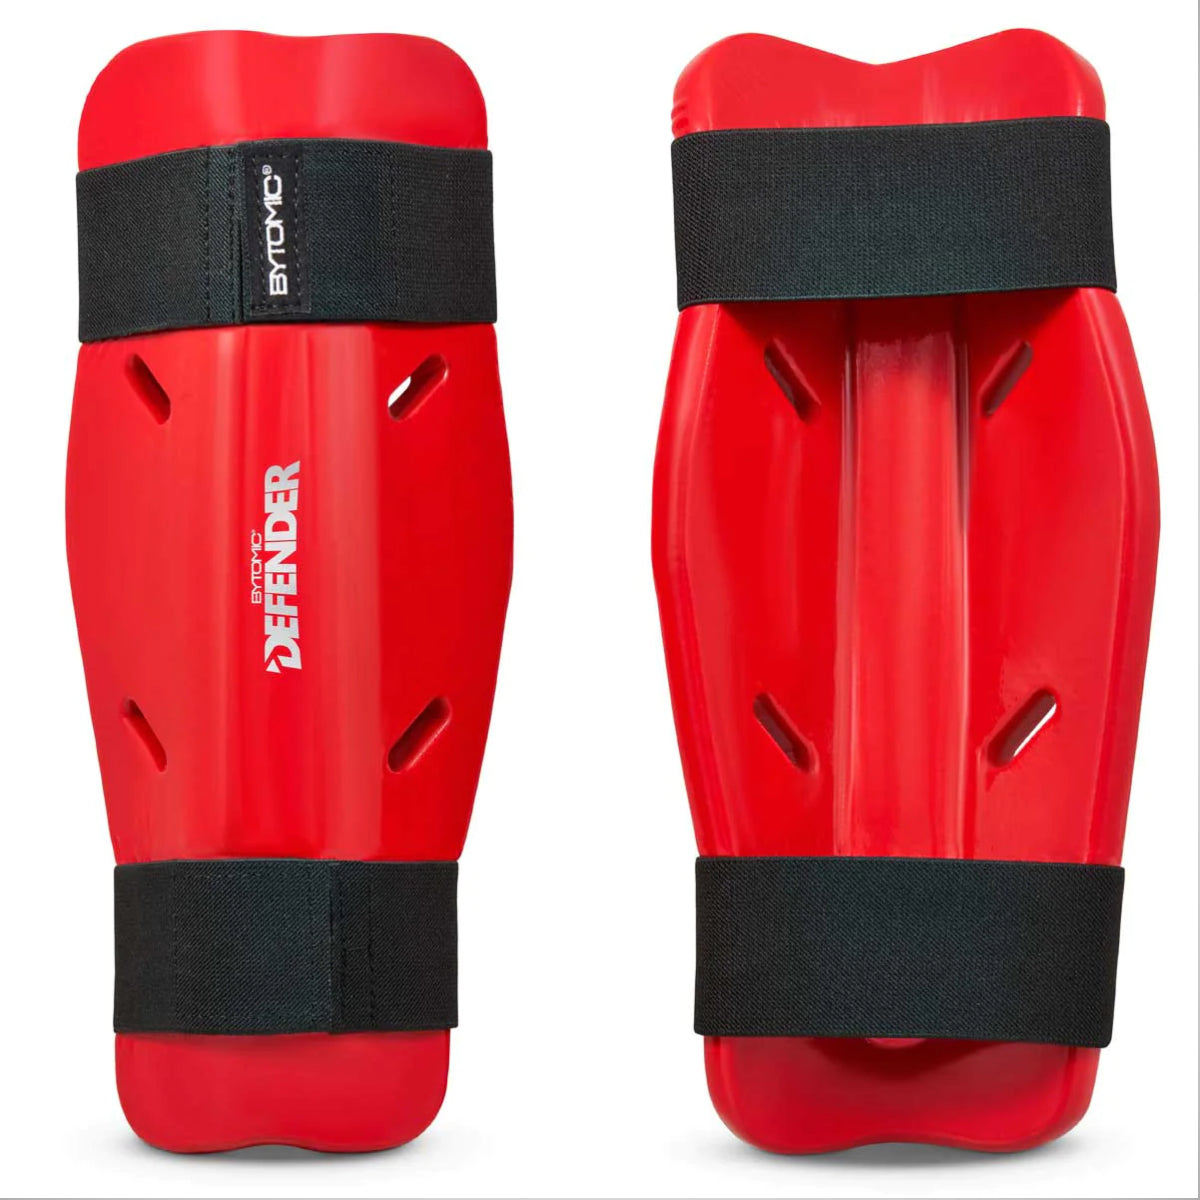 Red Bytomic Defender Shin Guard from Made4Fighters